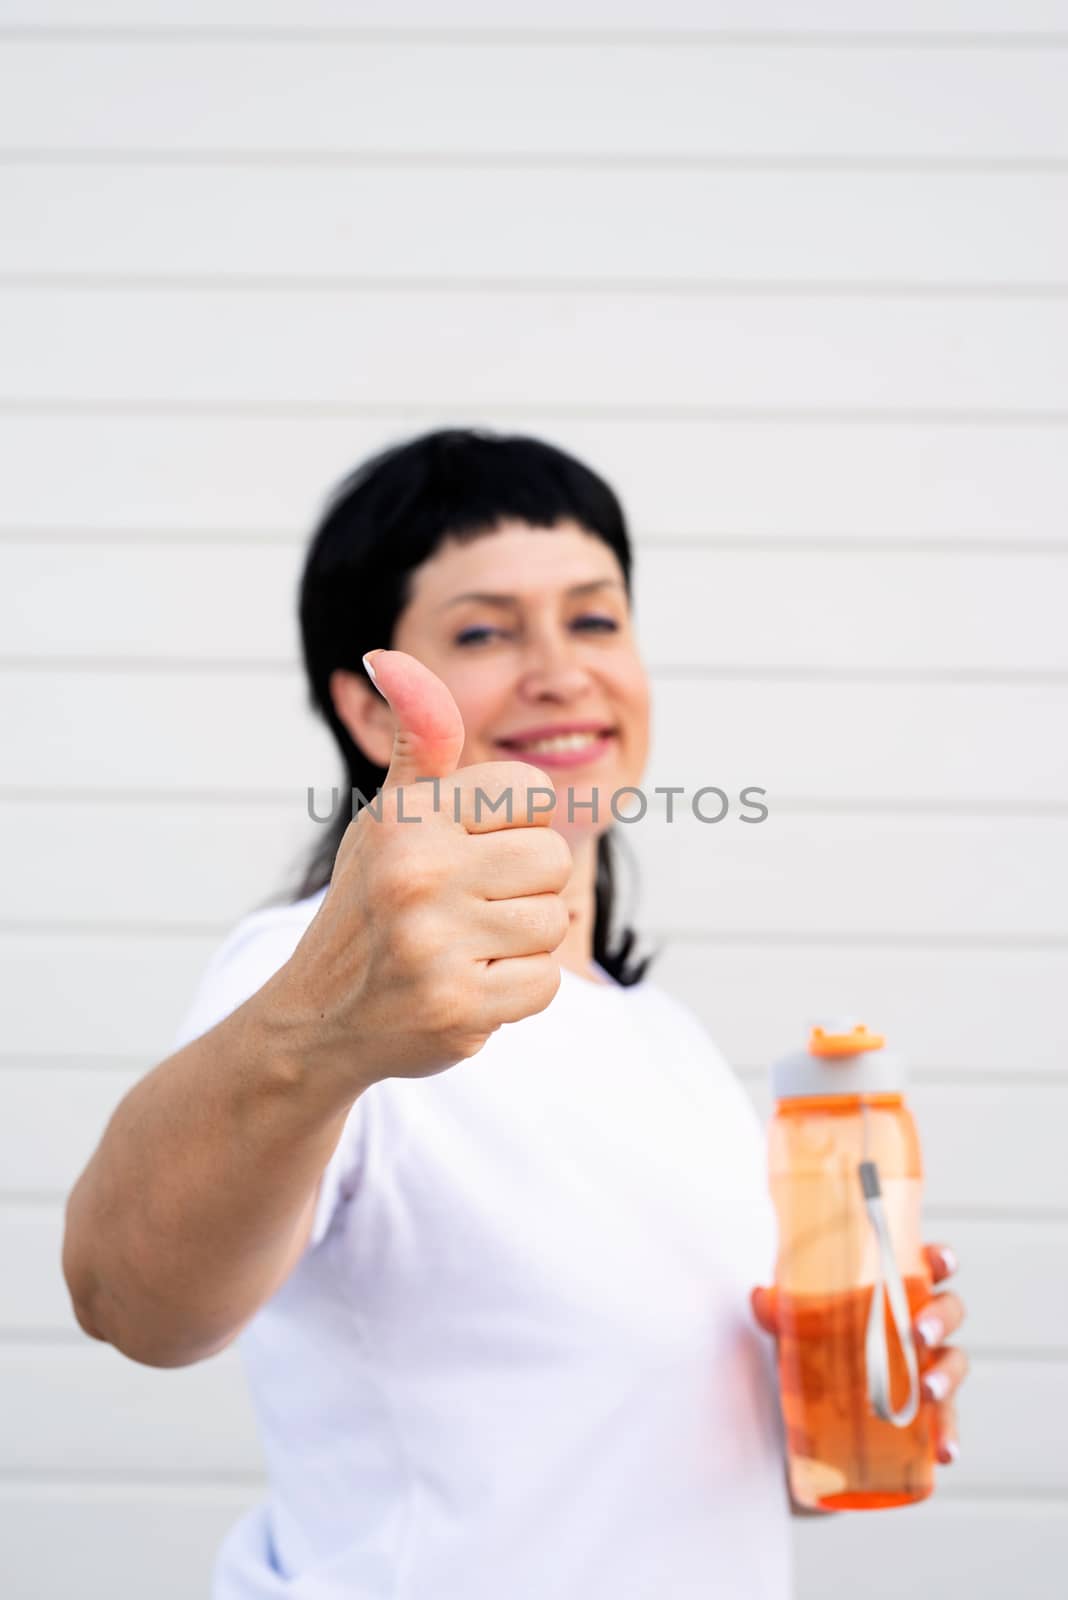 Sport and fitness. Senior sport. Active seniors. Smiling senior woman showing thumbs up after standing outdoors on gray solid background